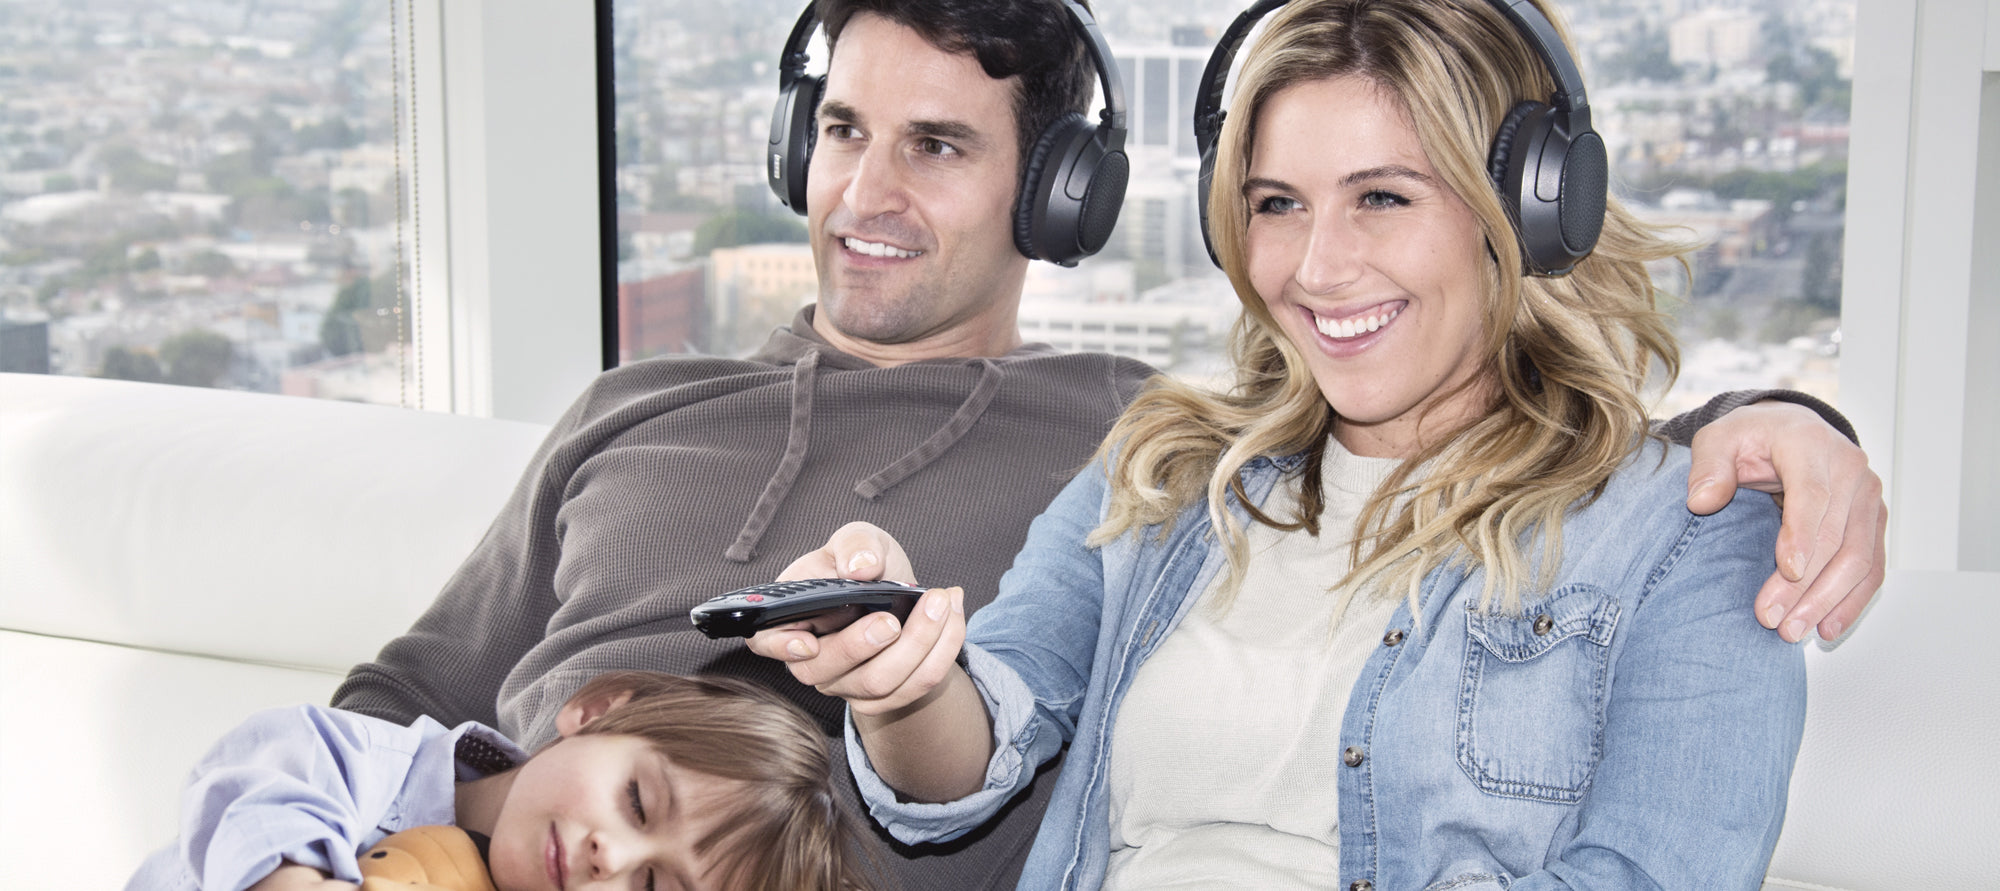 A cheerful young woman and a man wearing headphones sit on a couch, smiling at the camera, while a young child sleeps on the woman's lap. the man holds a remote control. bright cityscape visible through the window behind them.